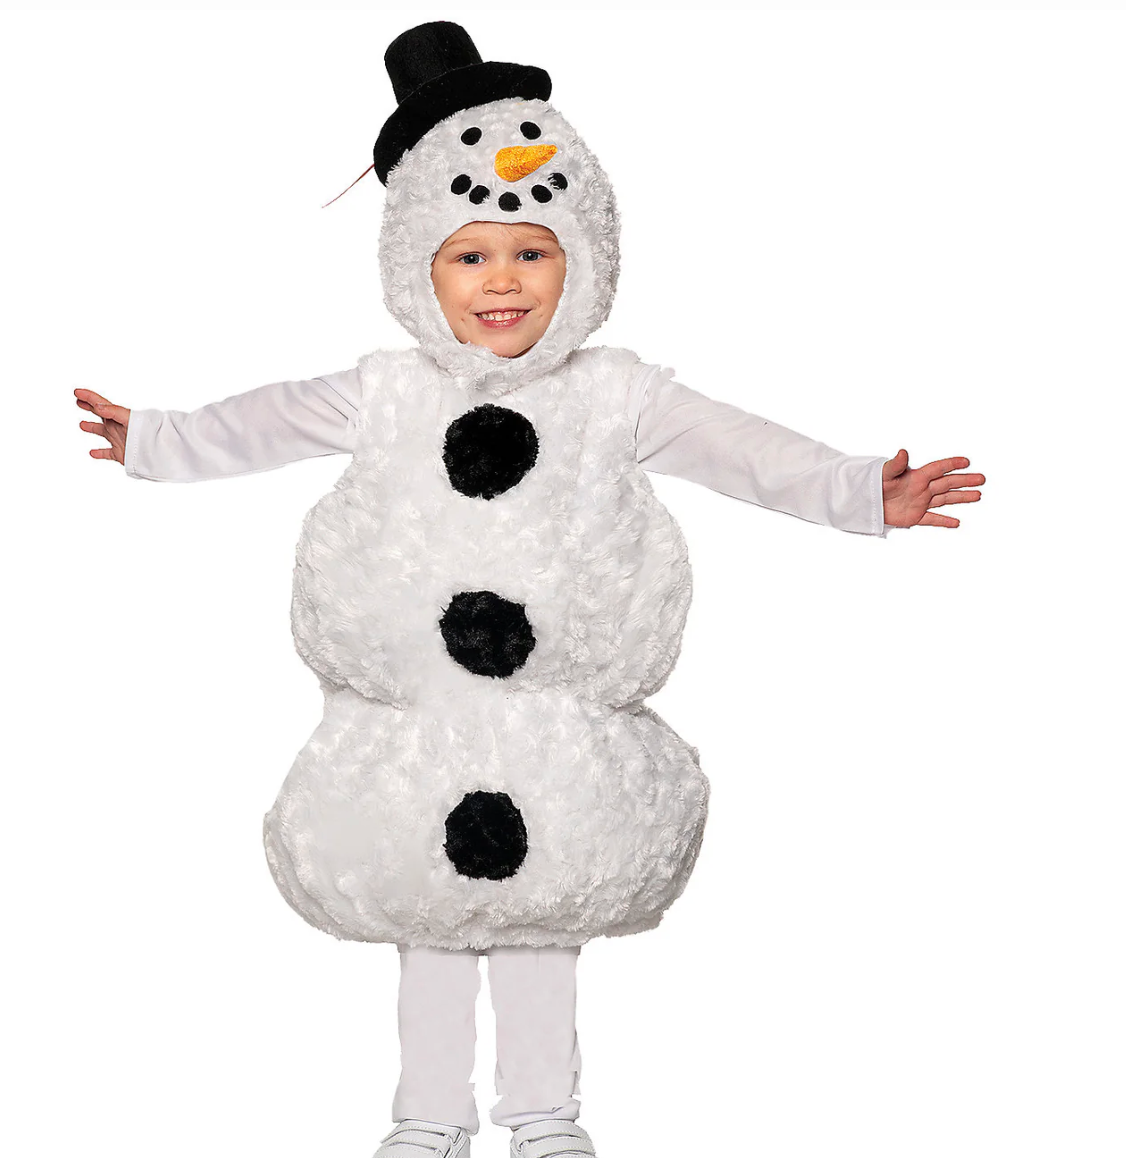 Snowman Belly Baby Toddler Costume - Frosty Fun for Little Ones! ⛄👶